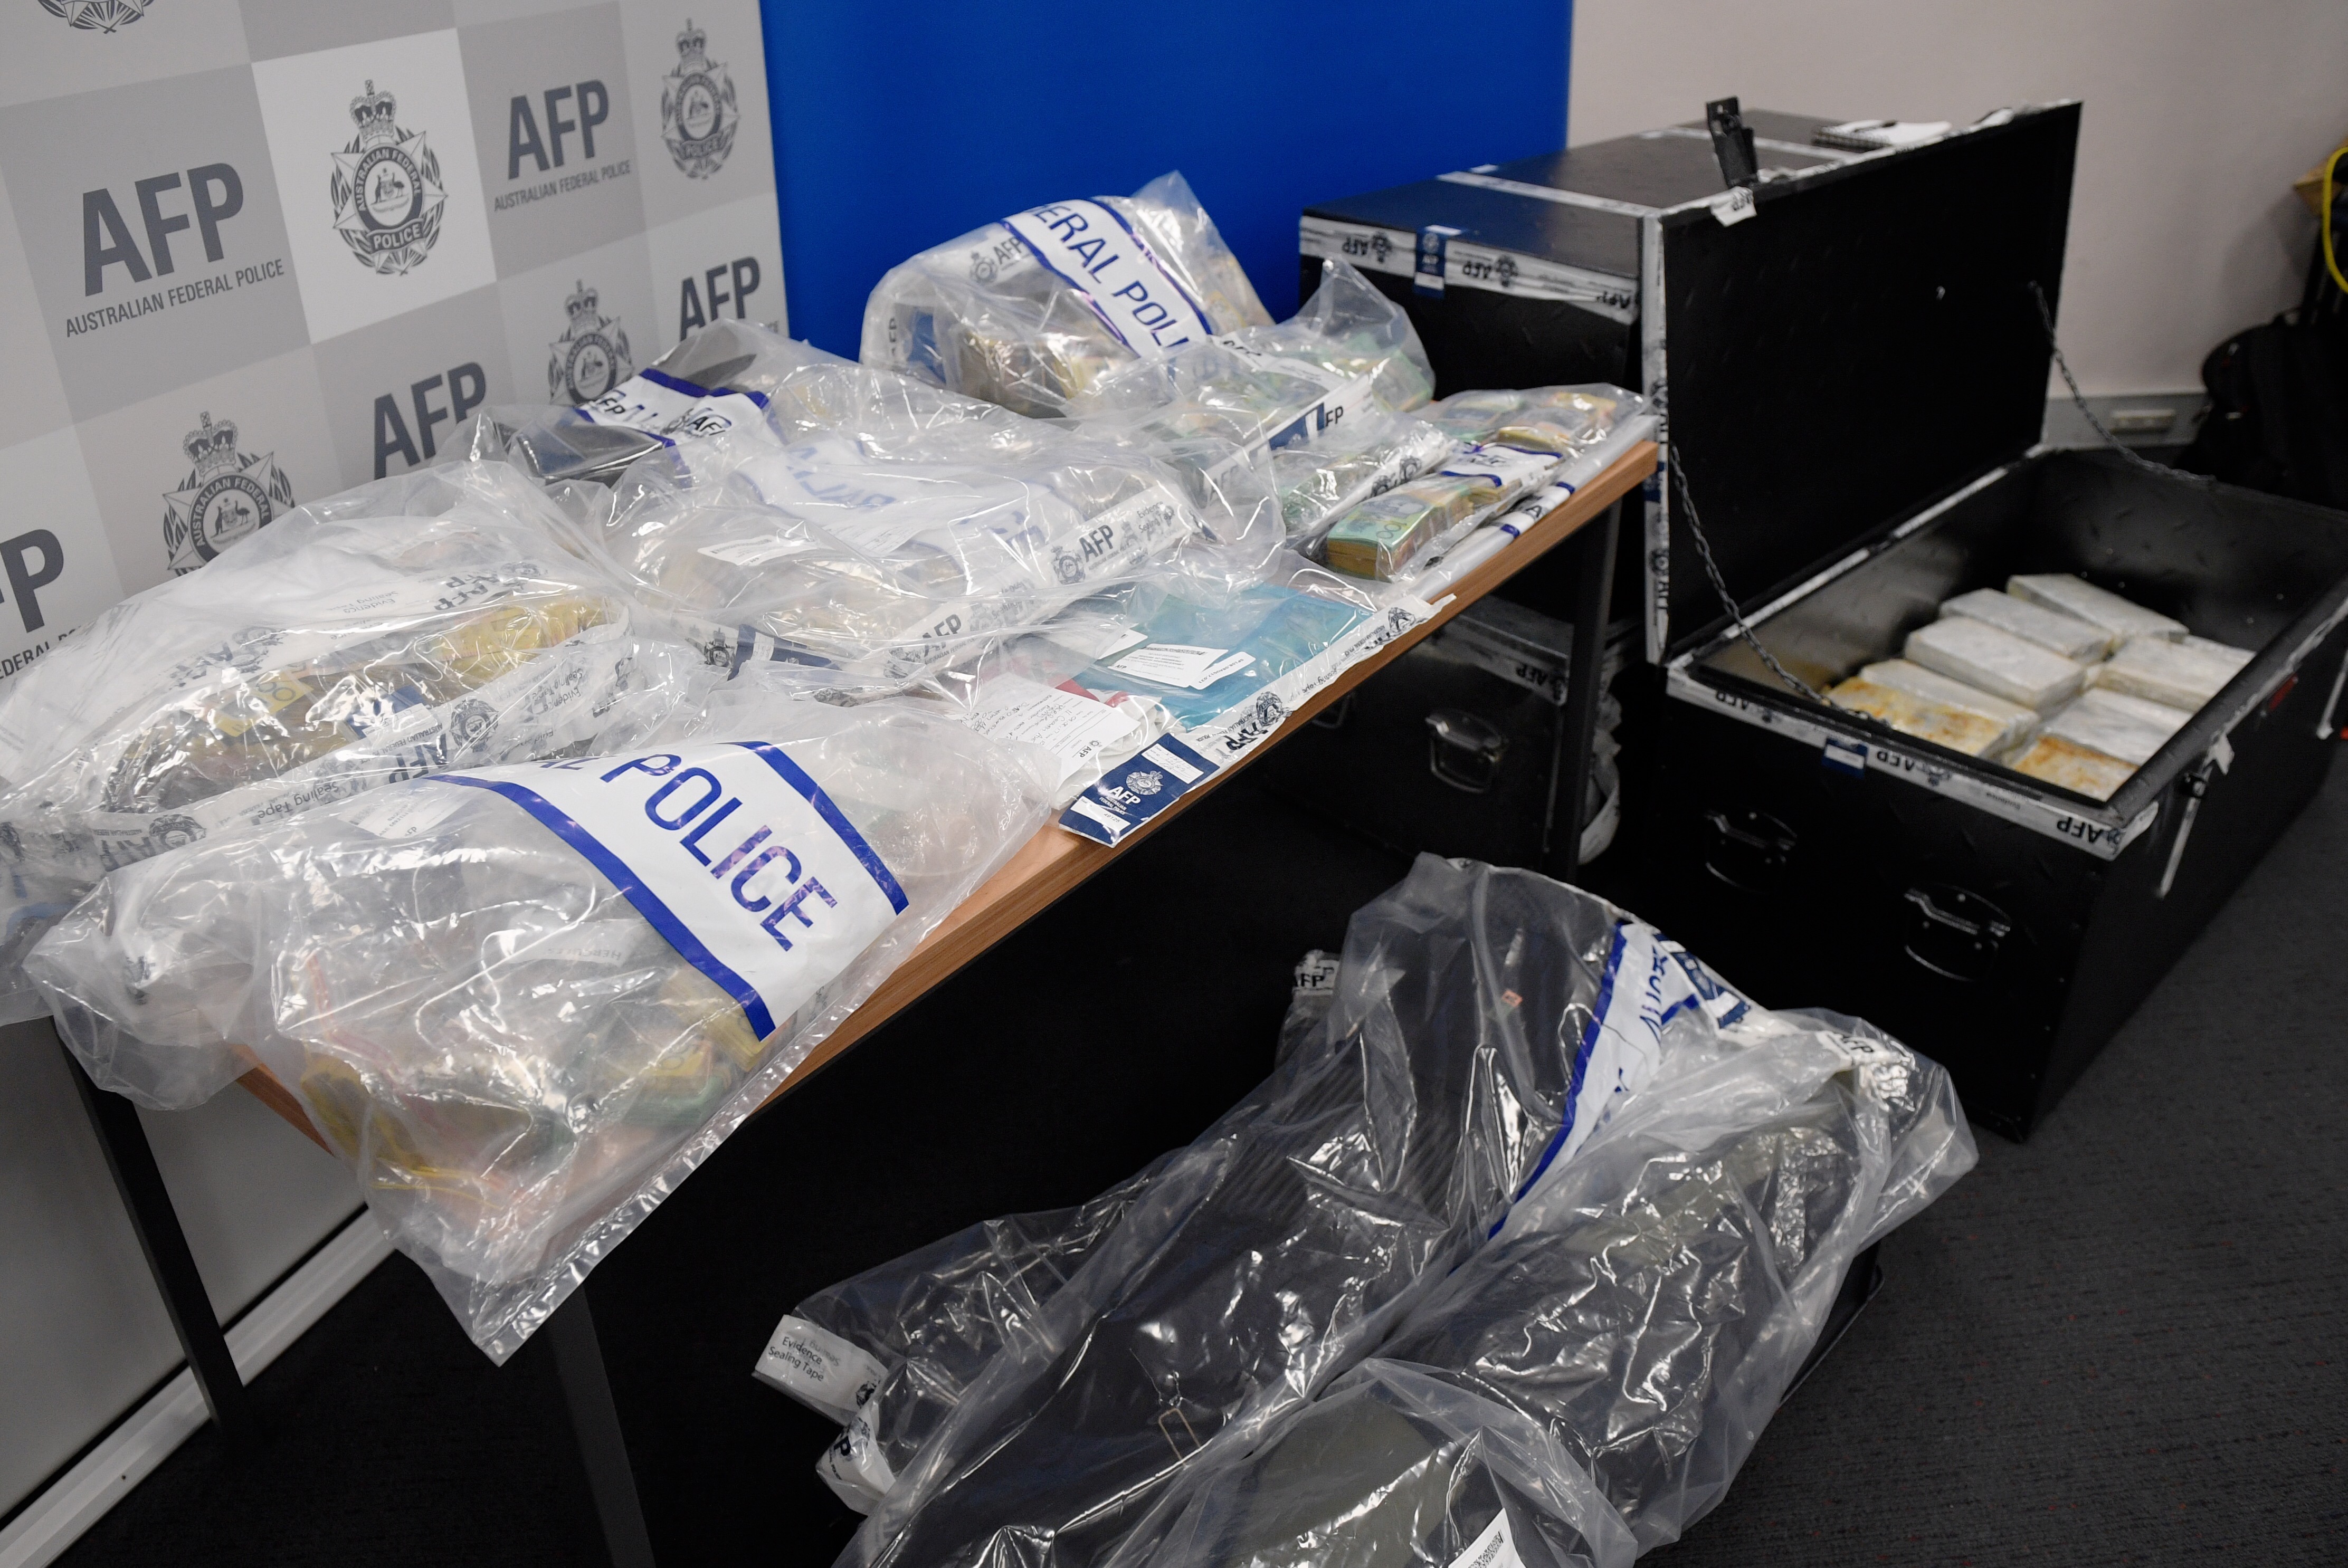 Drugs and illegal tobacco were seized during Tuesday's raids. (AAP)